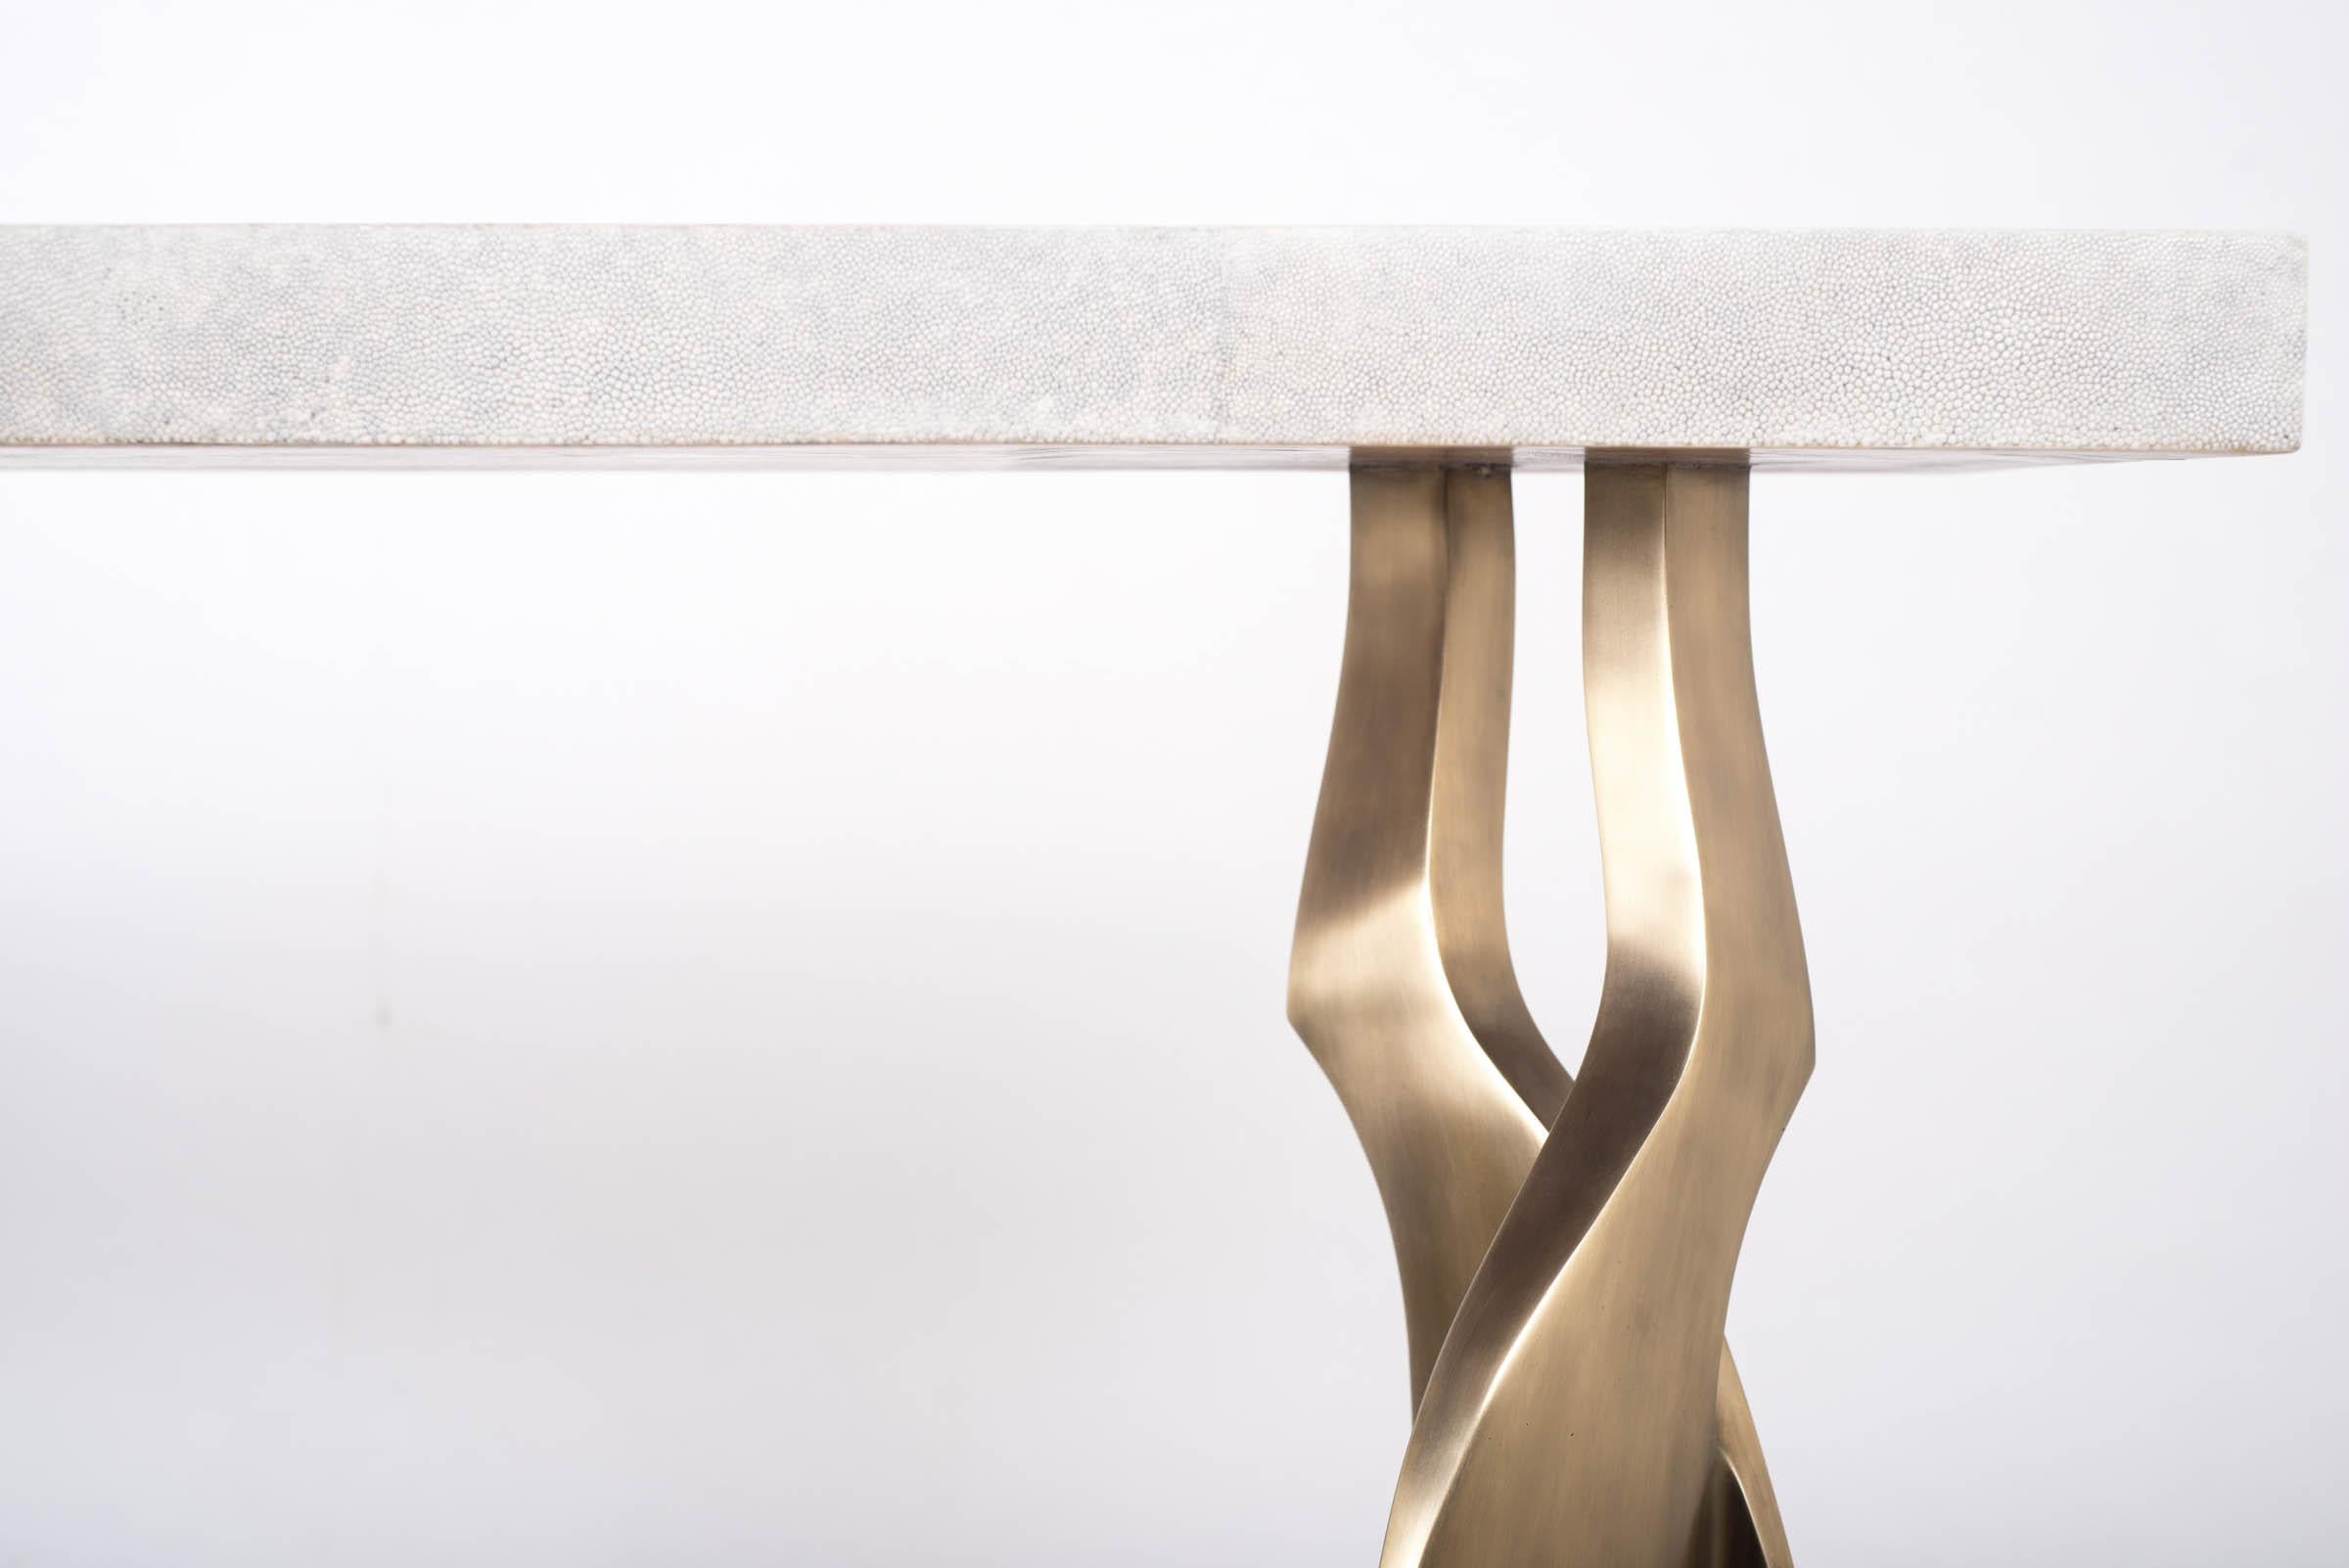 The Chital console table is both dramatic and organic it’s unique design. The cream shagreen inlaid top sits on a pair of ethereal and sculptural bronze-patina brass legs. This piece is designed by Kifu Augousti the daughter of Ria and Yiouri